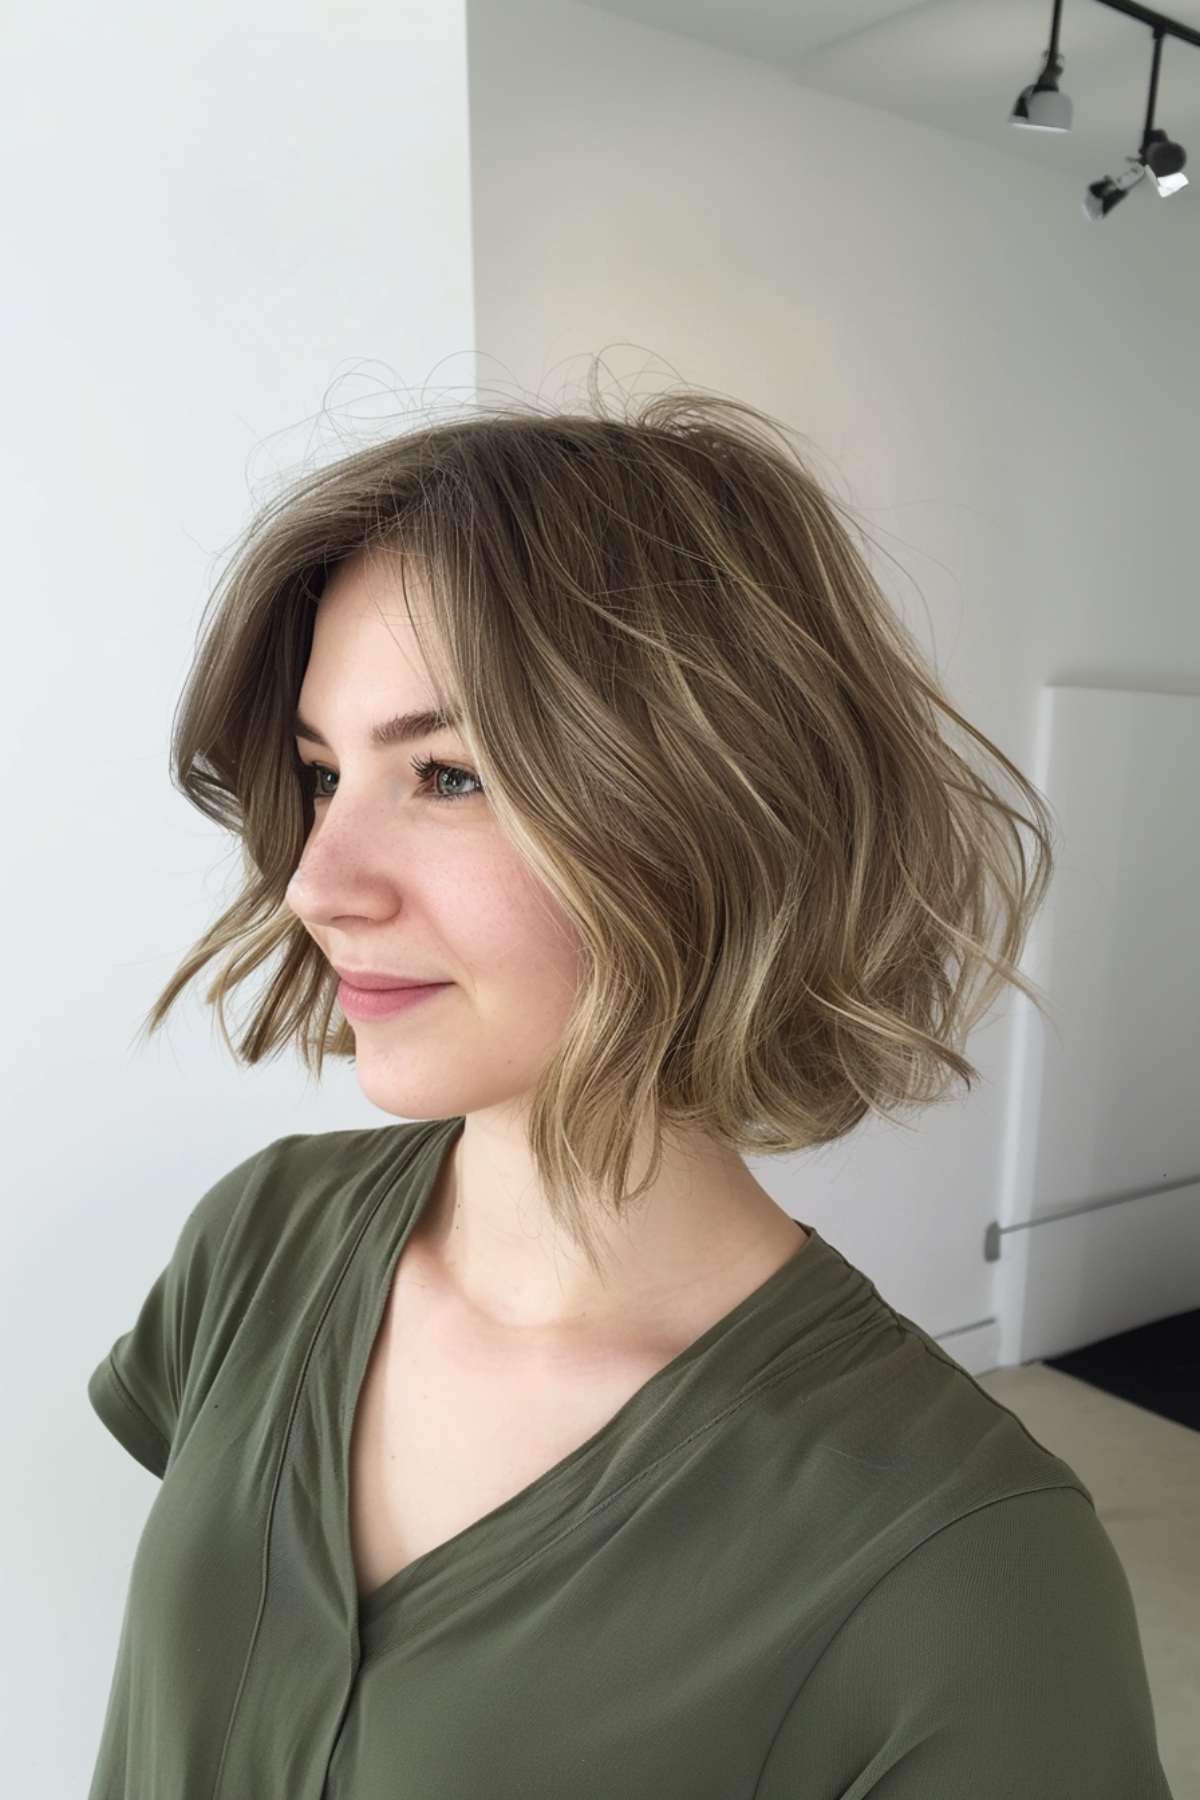 A woman styled her thin hair in a layered, inverted teacup bob with soft waves.